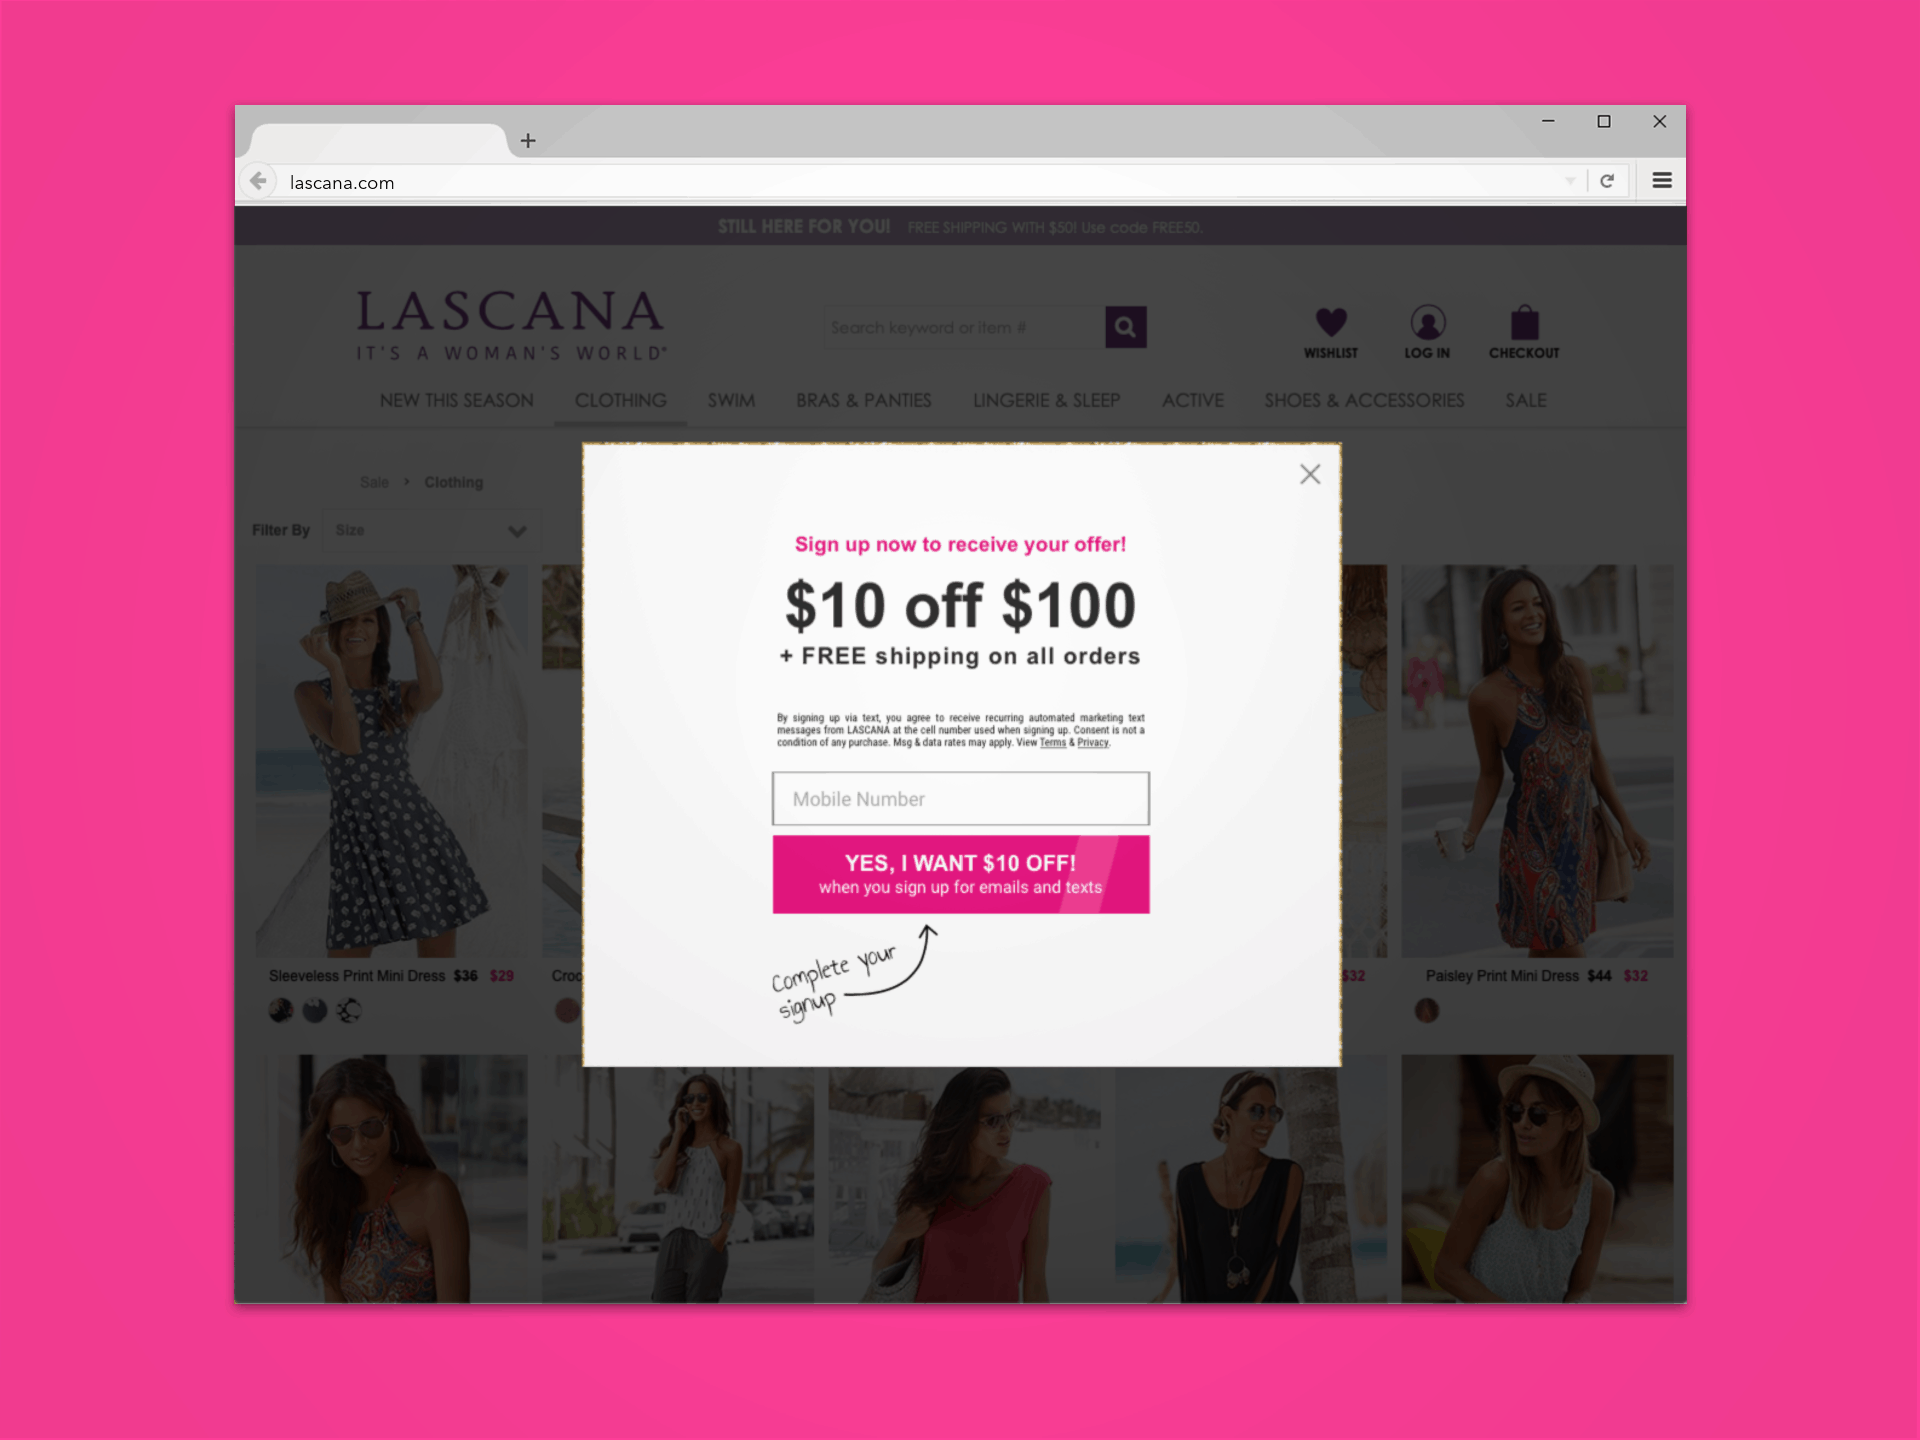 sms marketing pop-up example from lascana